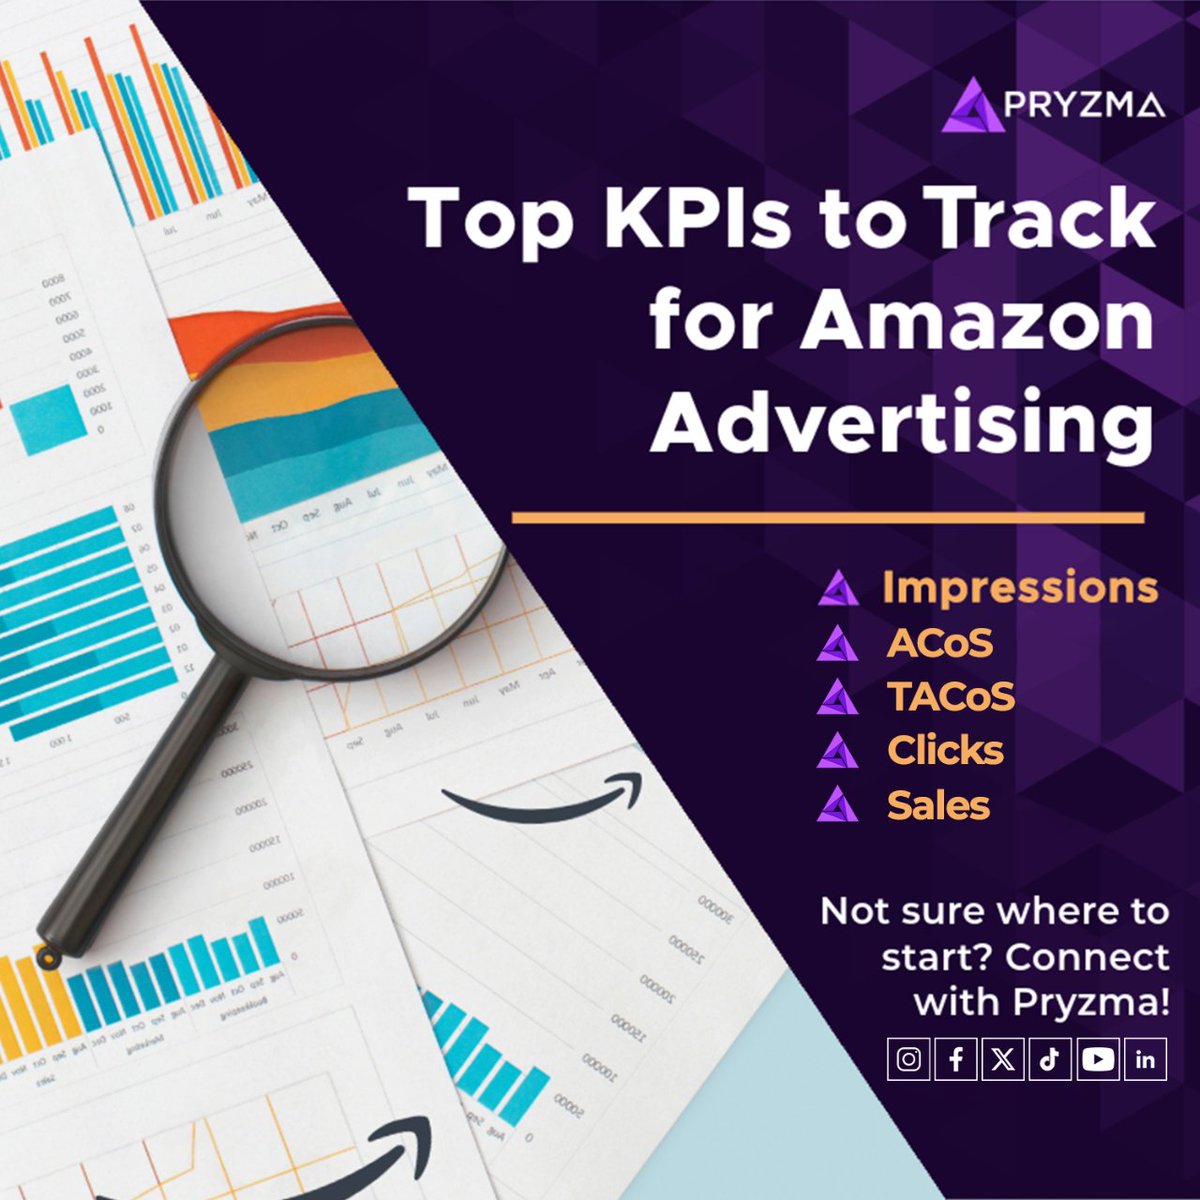 Discover the top KPIs for Amazon Advertising success! Unsure where to begin? Pryzma is here to help you navigate and excel in Amazon Advertising. Connect with us today! #ecommerce #ecommercebusiness #amazonfba #amazonseller #amazonfbaseller #amazonsellers #amazonppc #ppc #pryzma